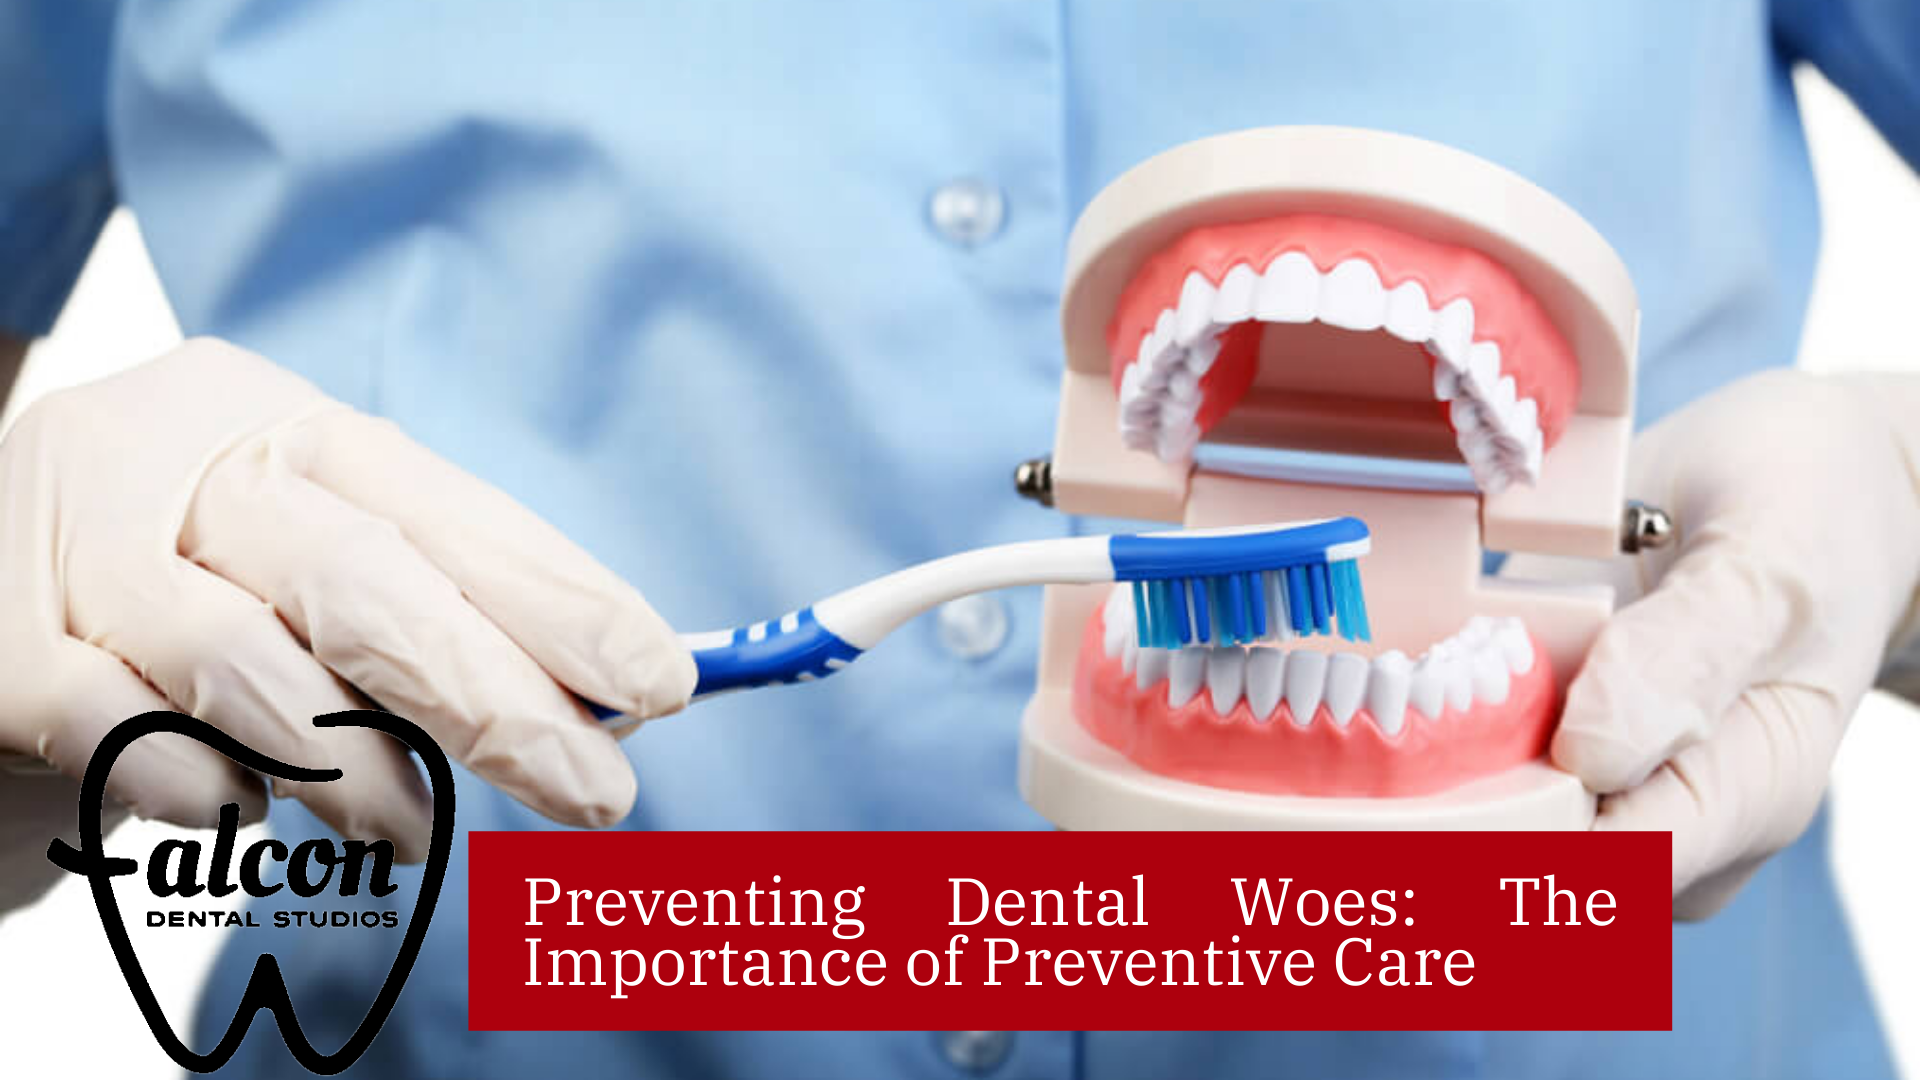 Preventing Dental Problems: The Importance of Preventive Care